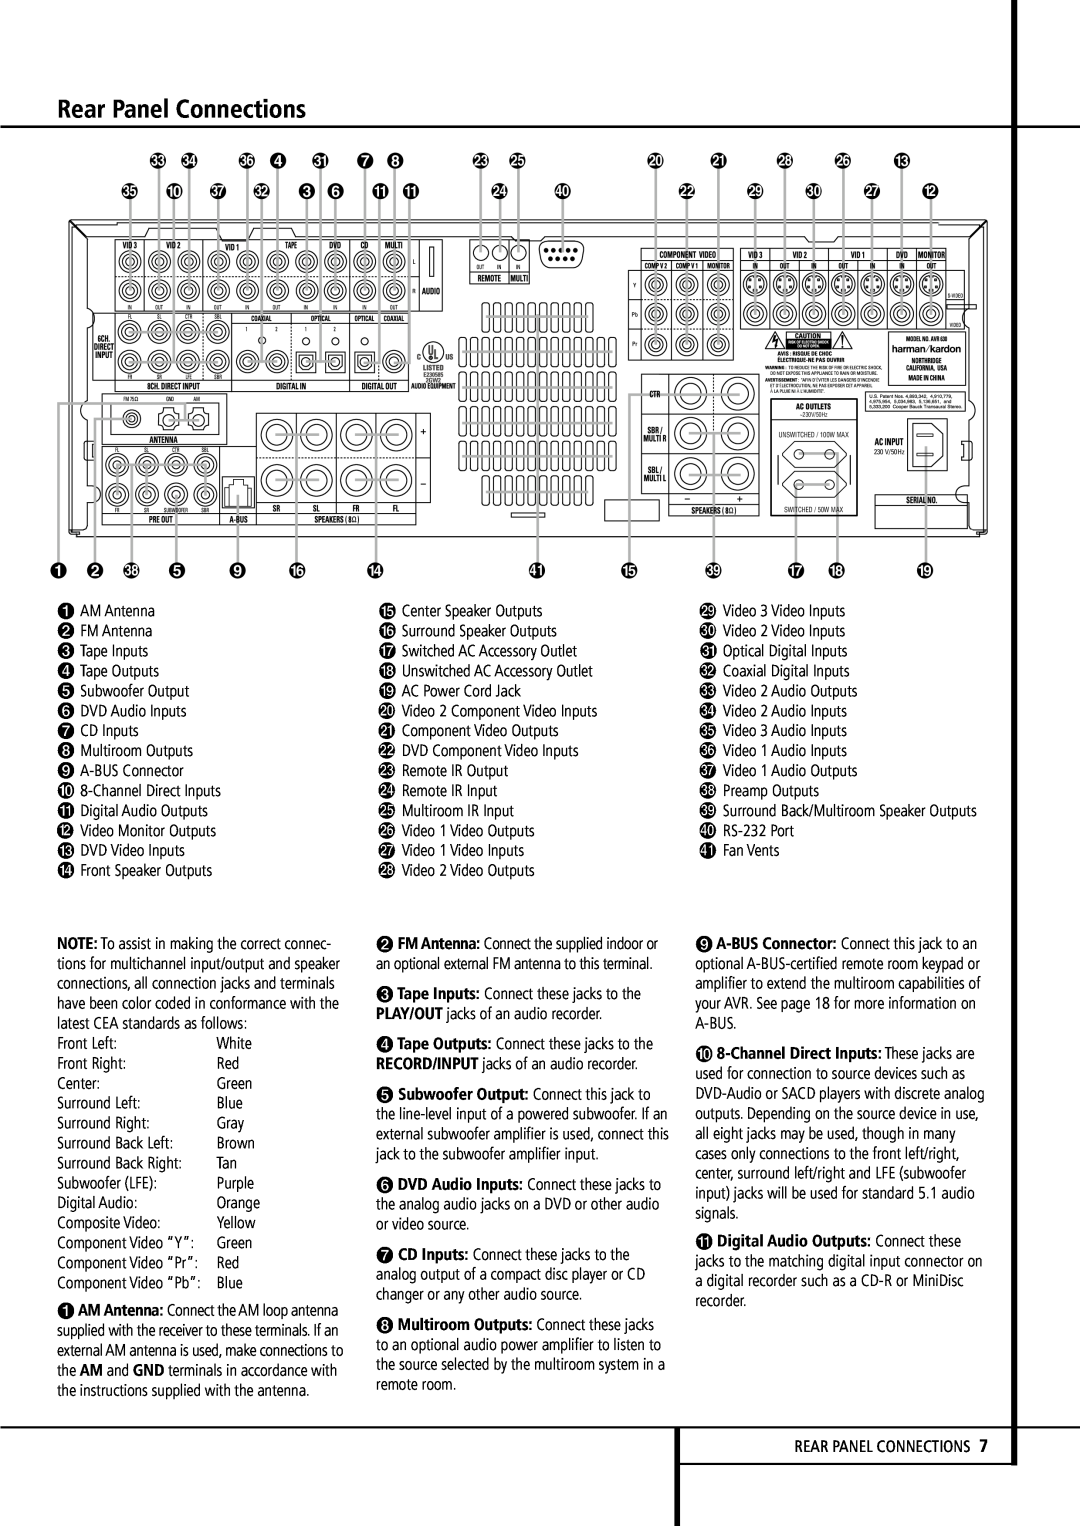 Harman-Kardon AVR 630 owner manual Rear Panel Connections, Digital Audio Outputs Connect these 